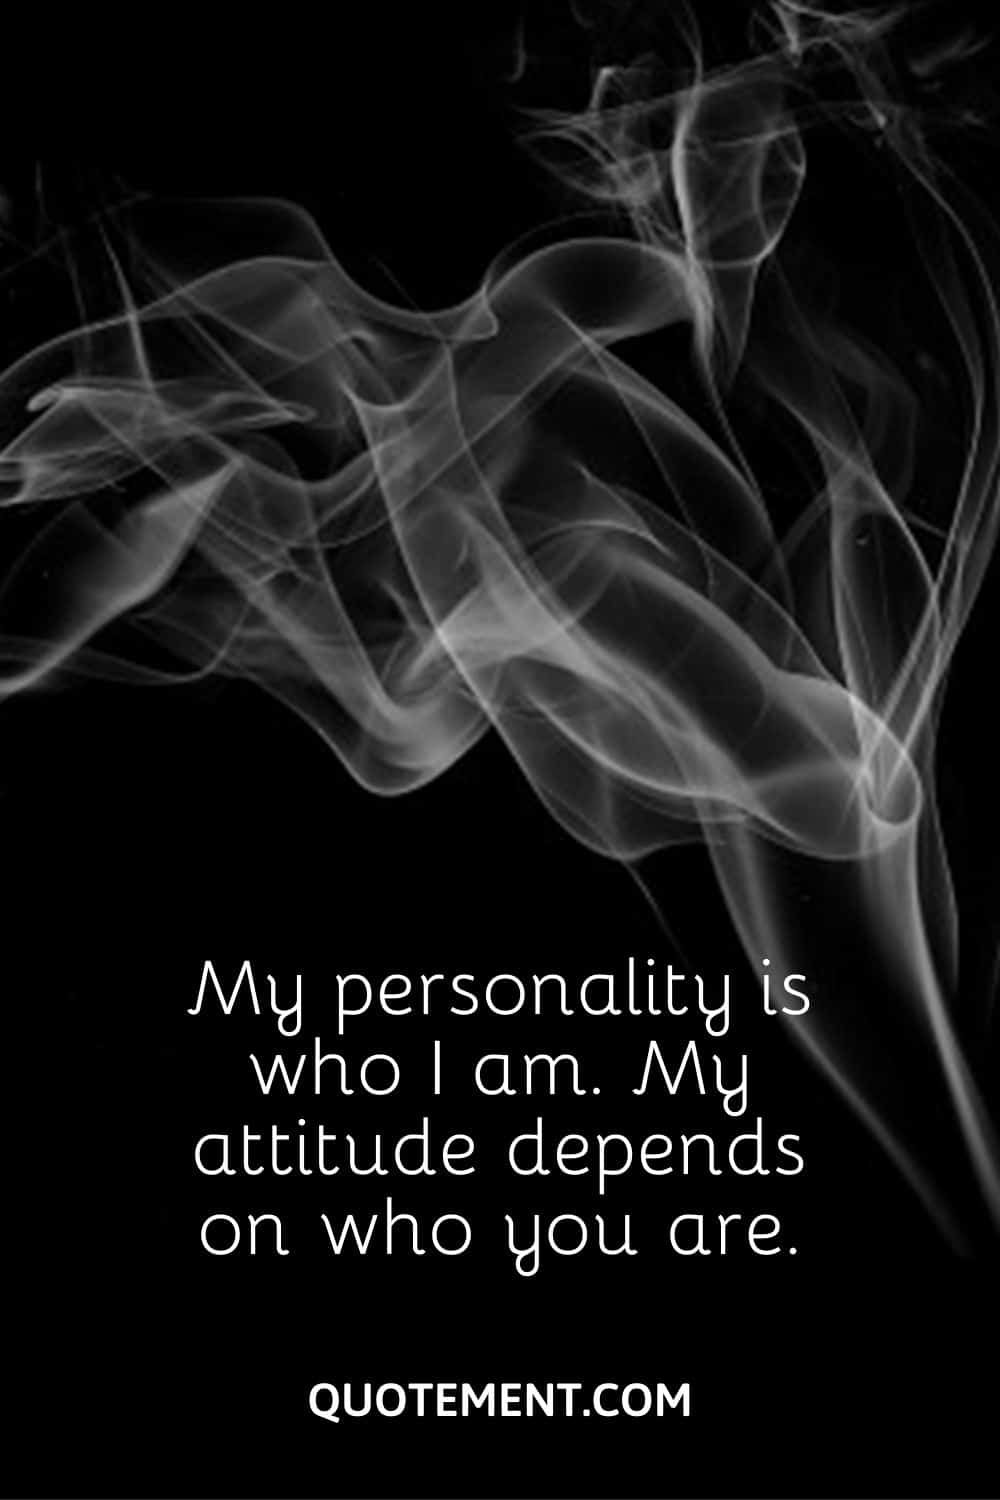 My personality is who I am.